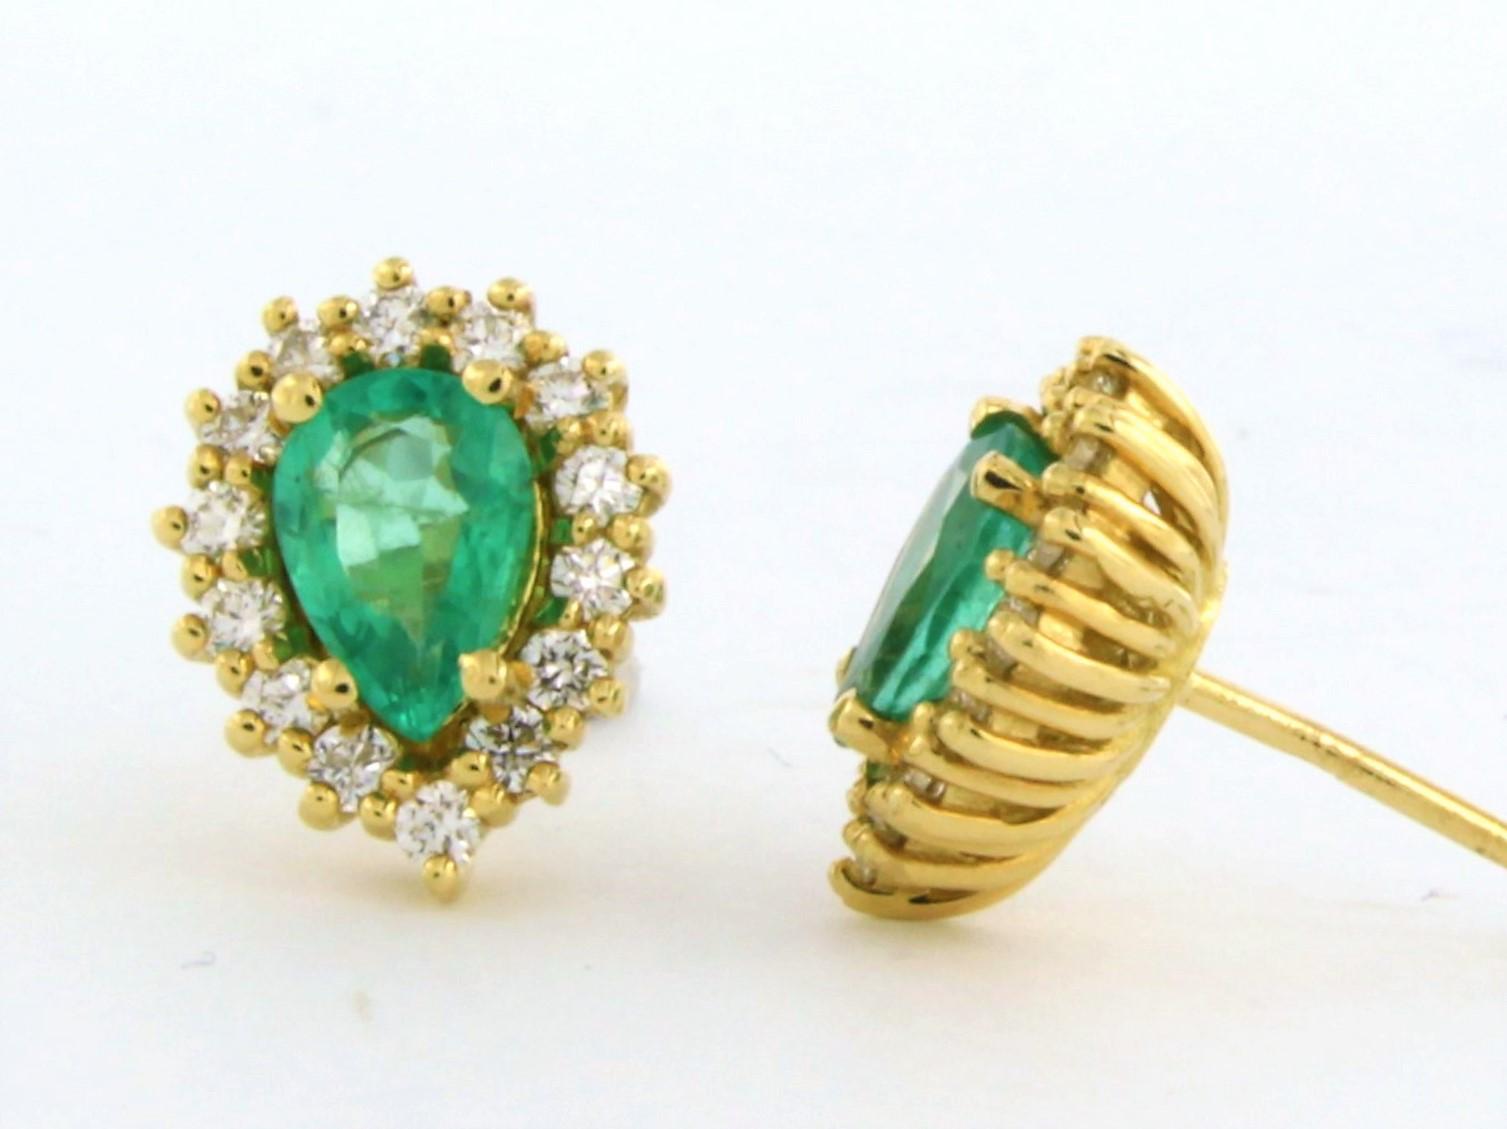 18k yellow gold entourage stud earrings set with emerald to. 1.10ct and an entourage of brilliant cut diamonds up to. 0.50ct - F/G - VS/SI

Detailed description:

the size of the ear stud is 1.2 cm long by 9.7 mm wide

weight 4.7 grams

occupied